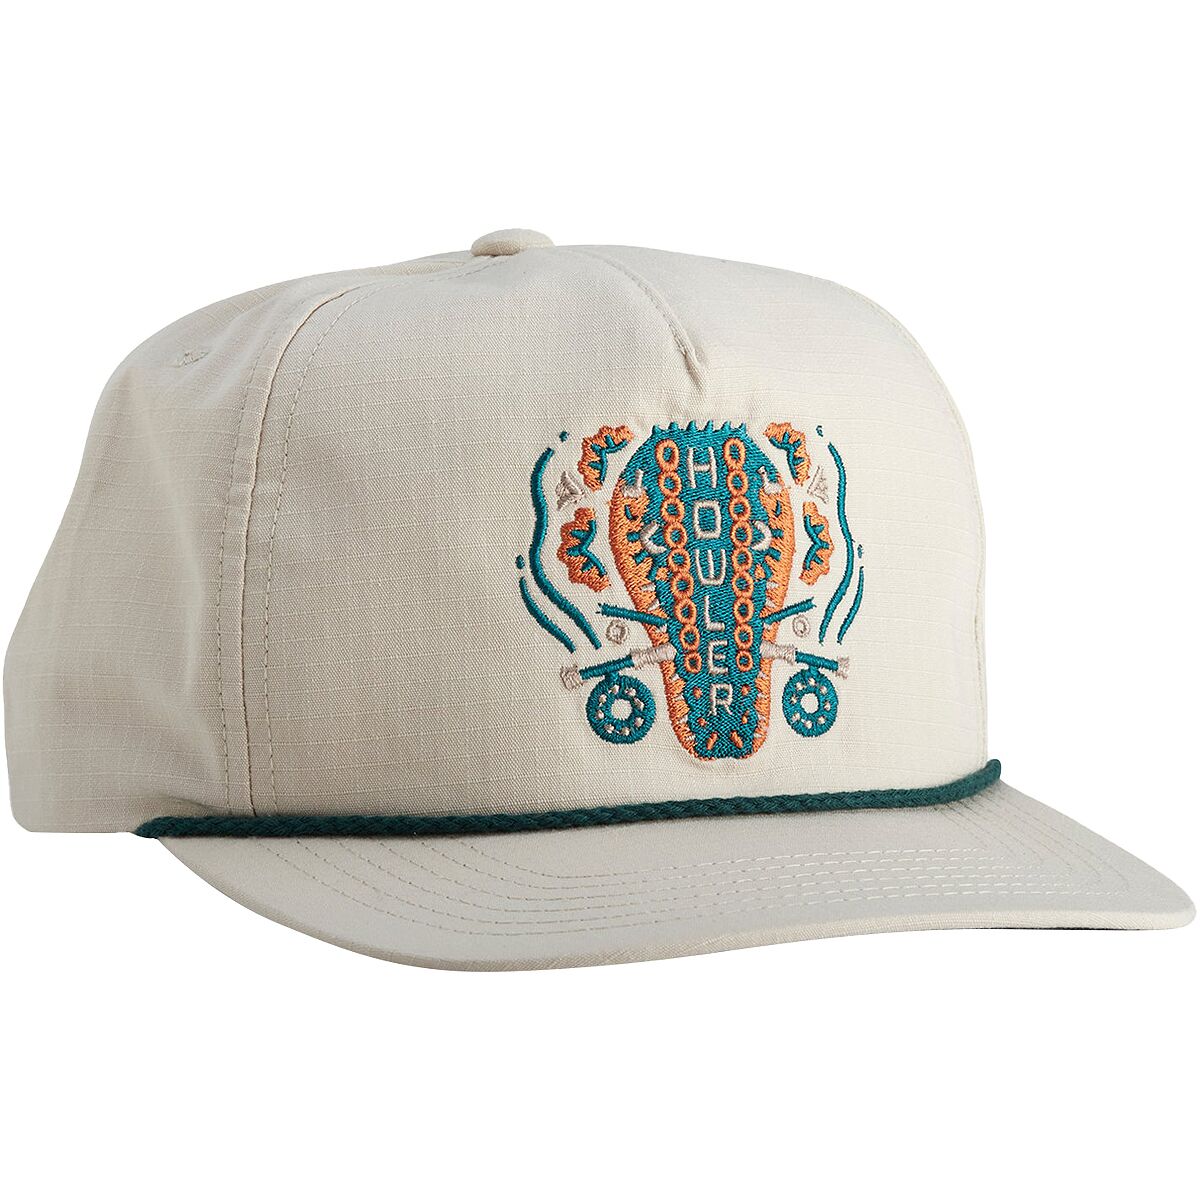 Howler Brothers Gator Chomp Unstructured Snapback Hat